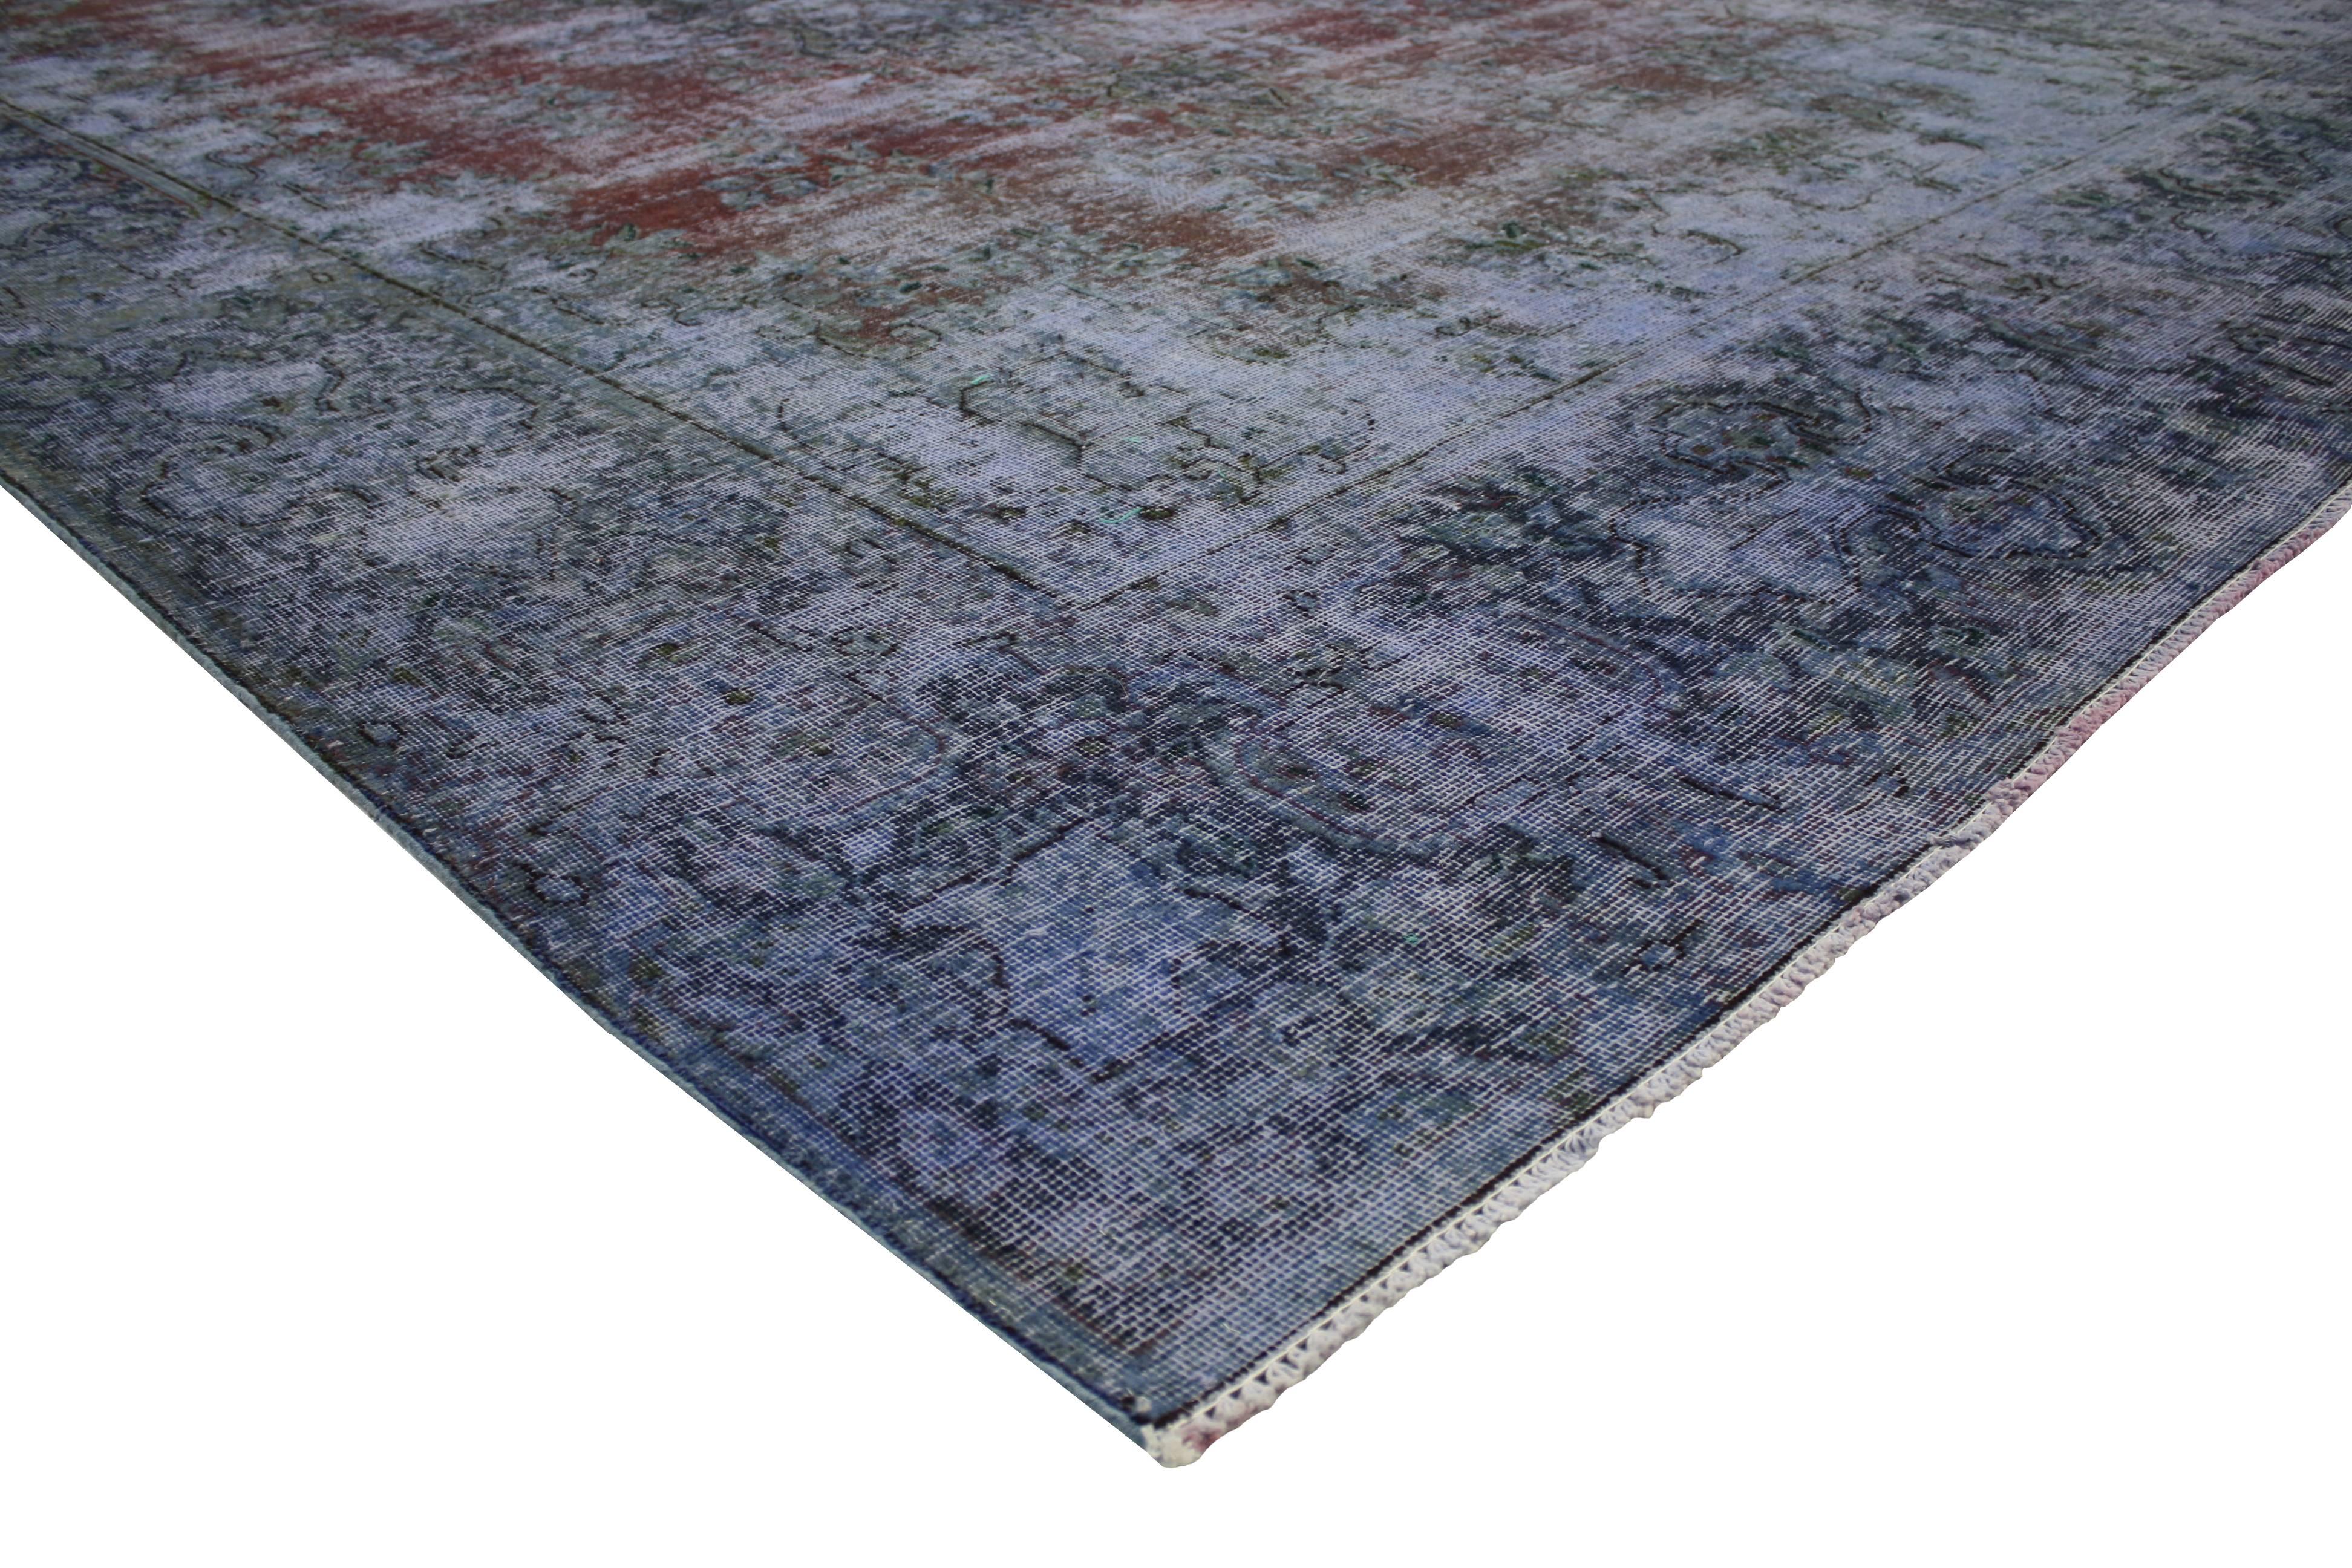 20th Century Distressed Vintage Persian Rug Overdyed with Modern Industrial Style